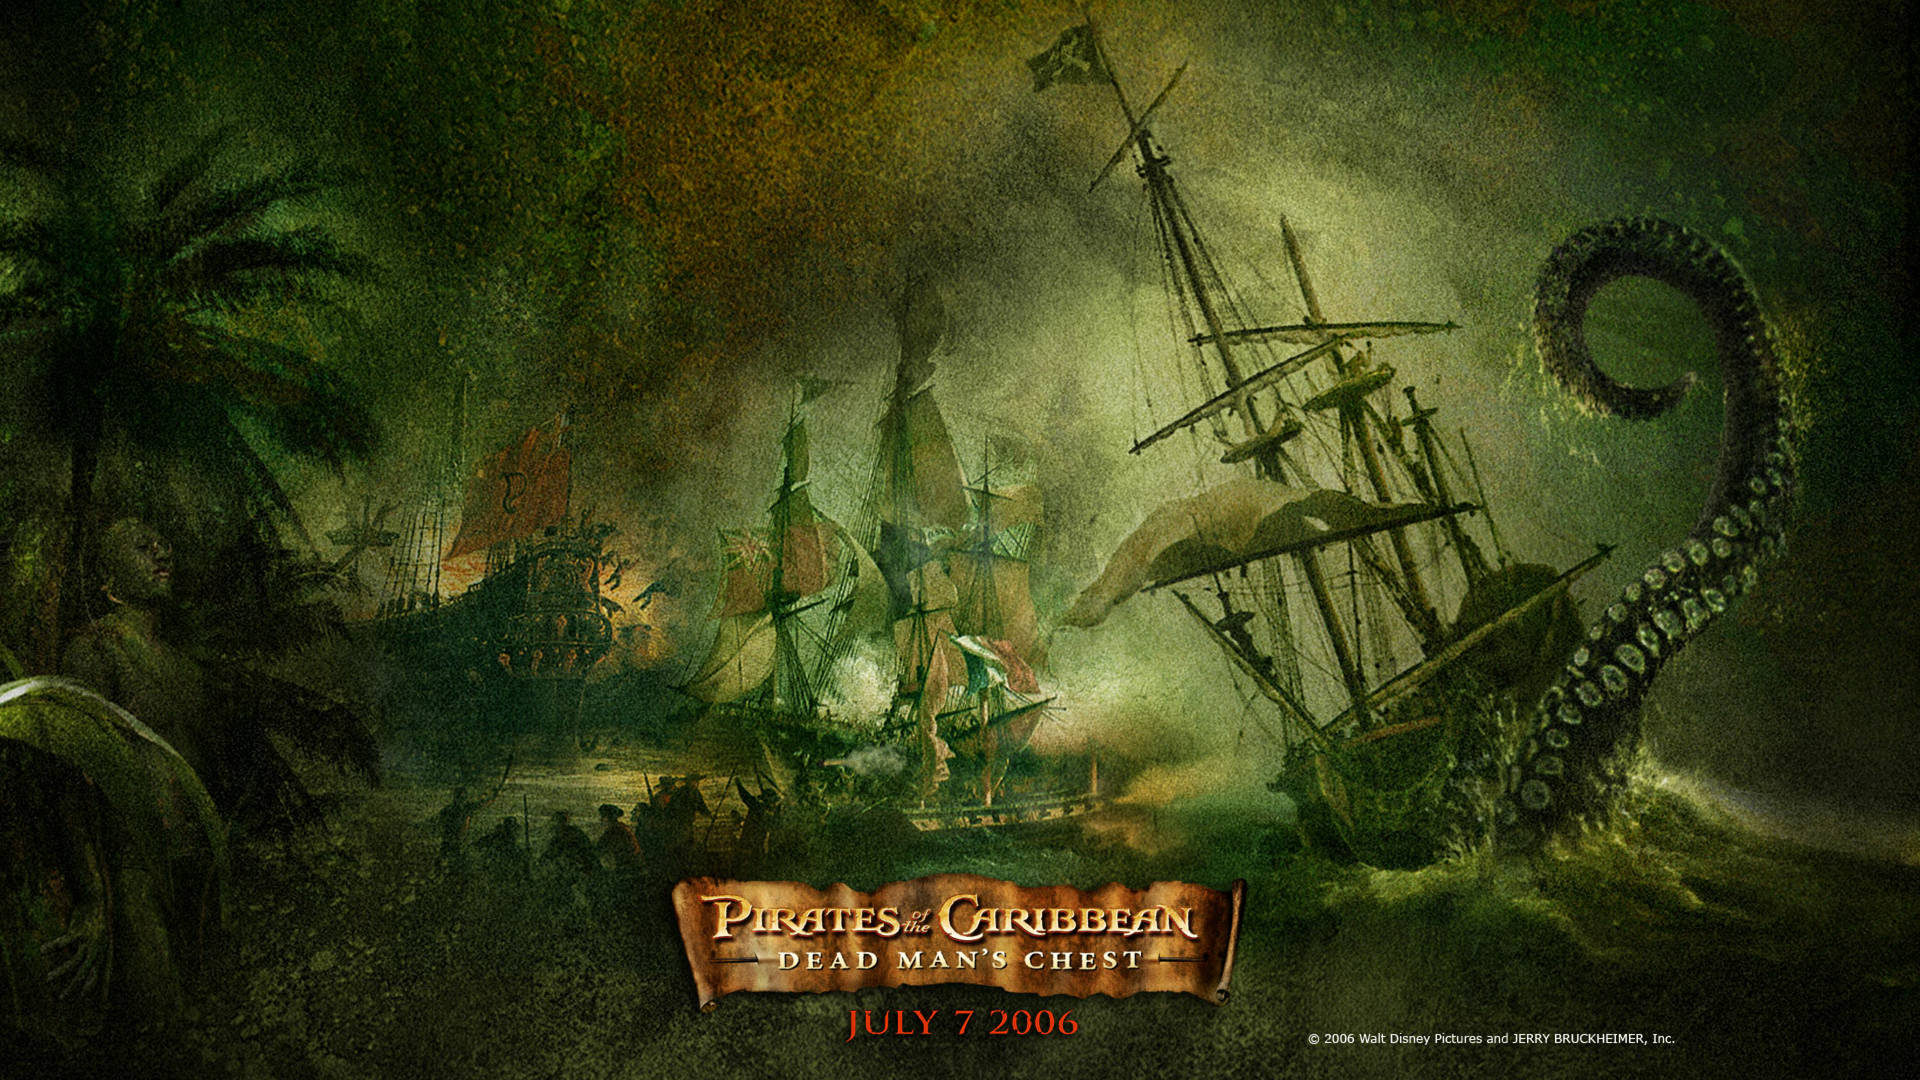 Pirates Of The Caribbean: Dead Man's Chest Poster Background